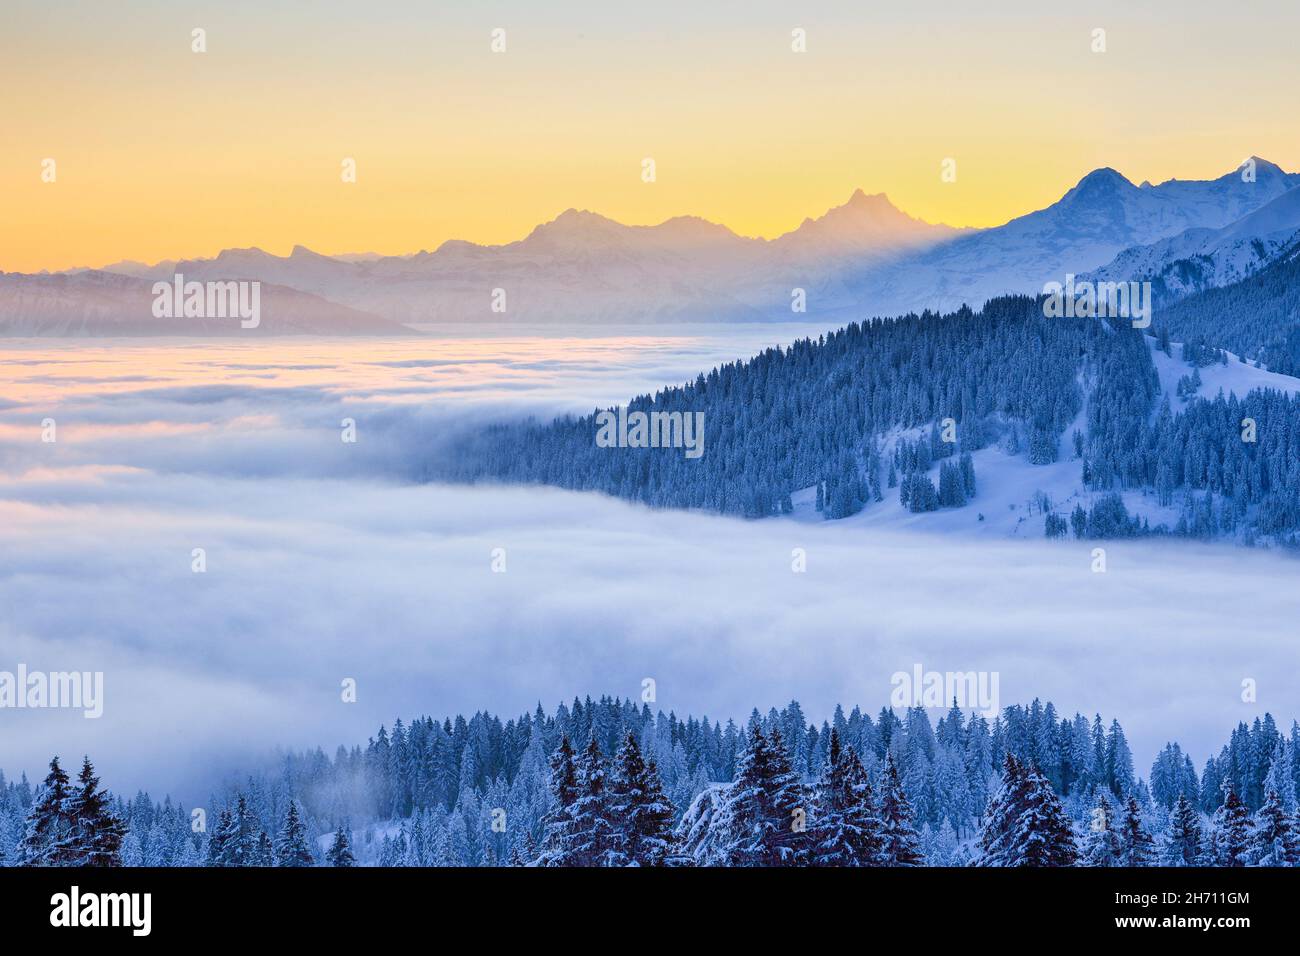 Swiss pre-Alps and Alps with Schreckhorn (4078 m), Eiger (3974 m) and Moench (4099 m) in the morning. View from Gurnigel, Switzerland.. Stock Photo